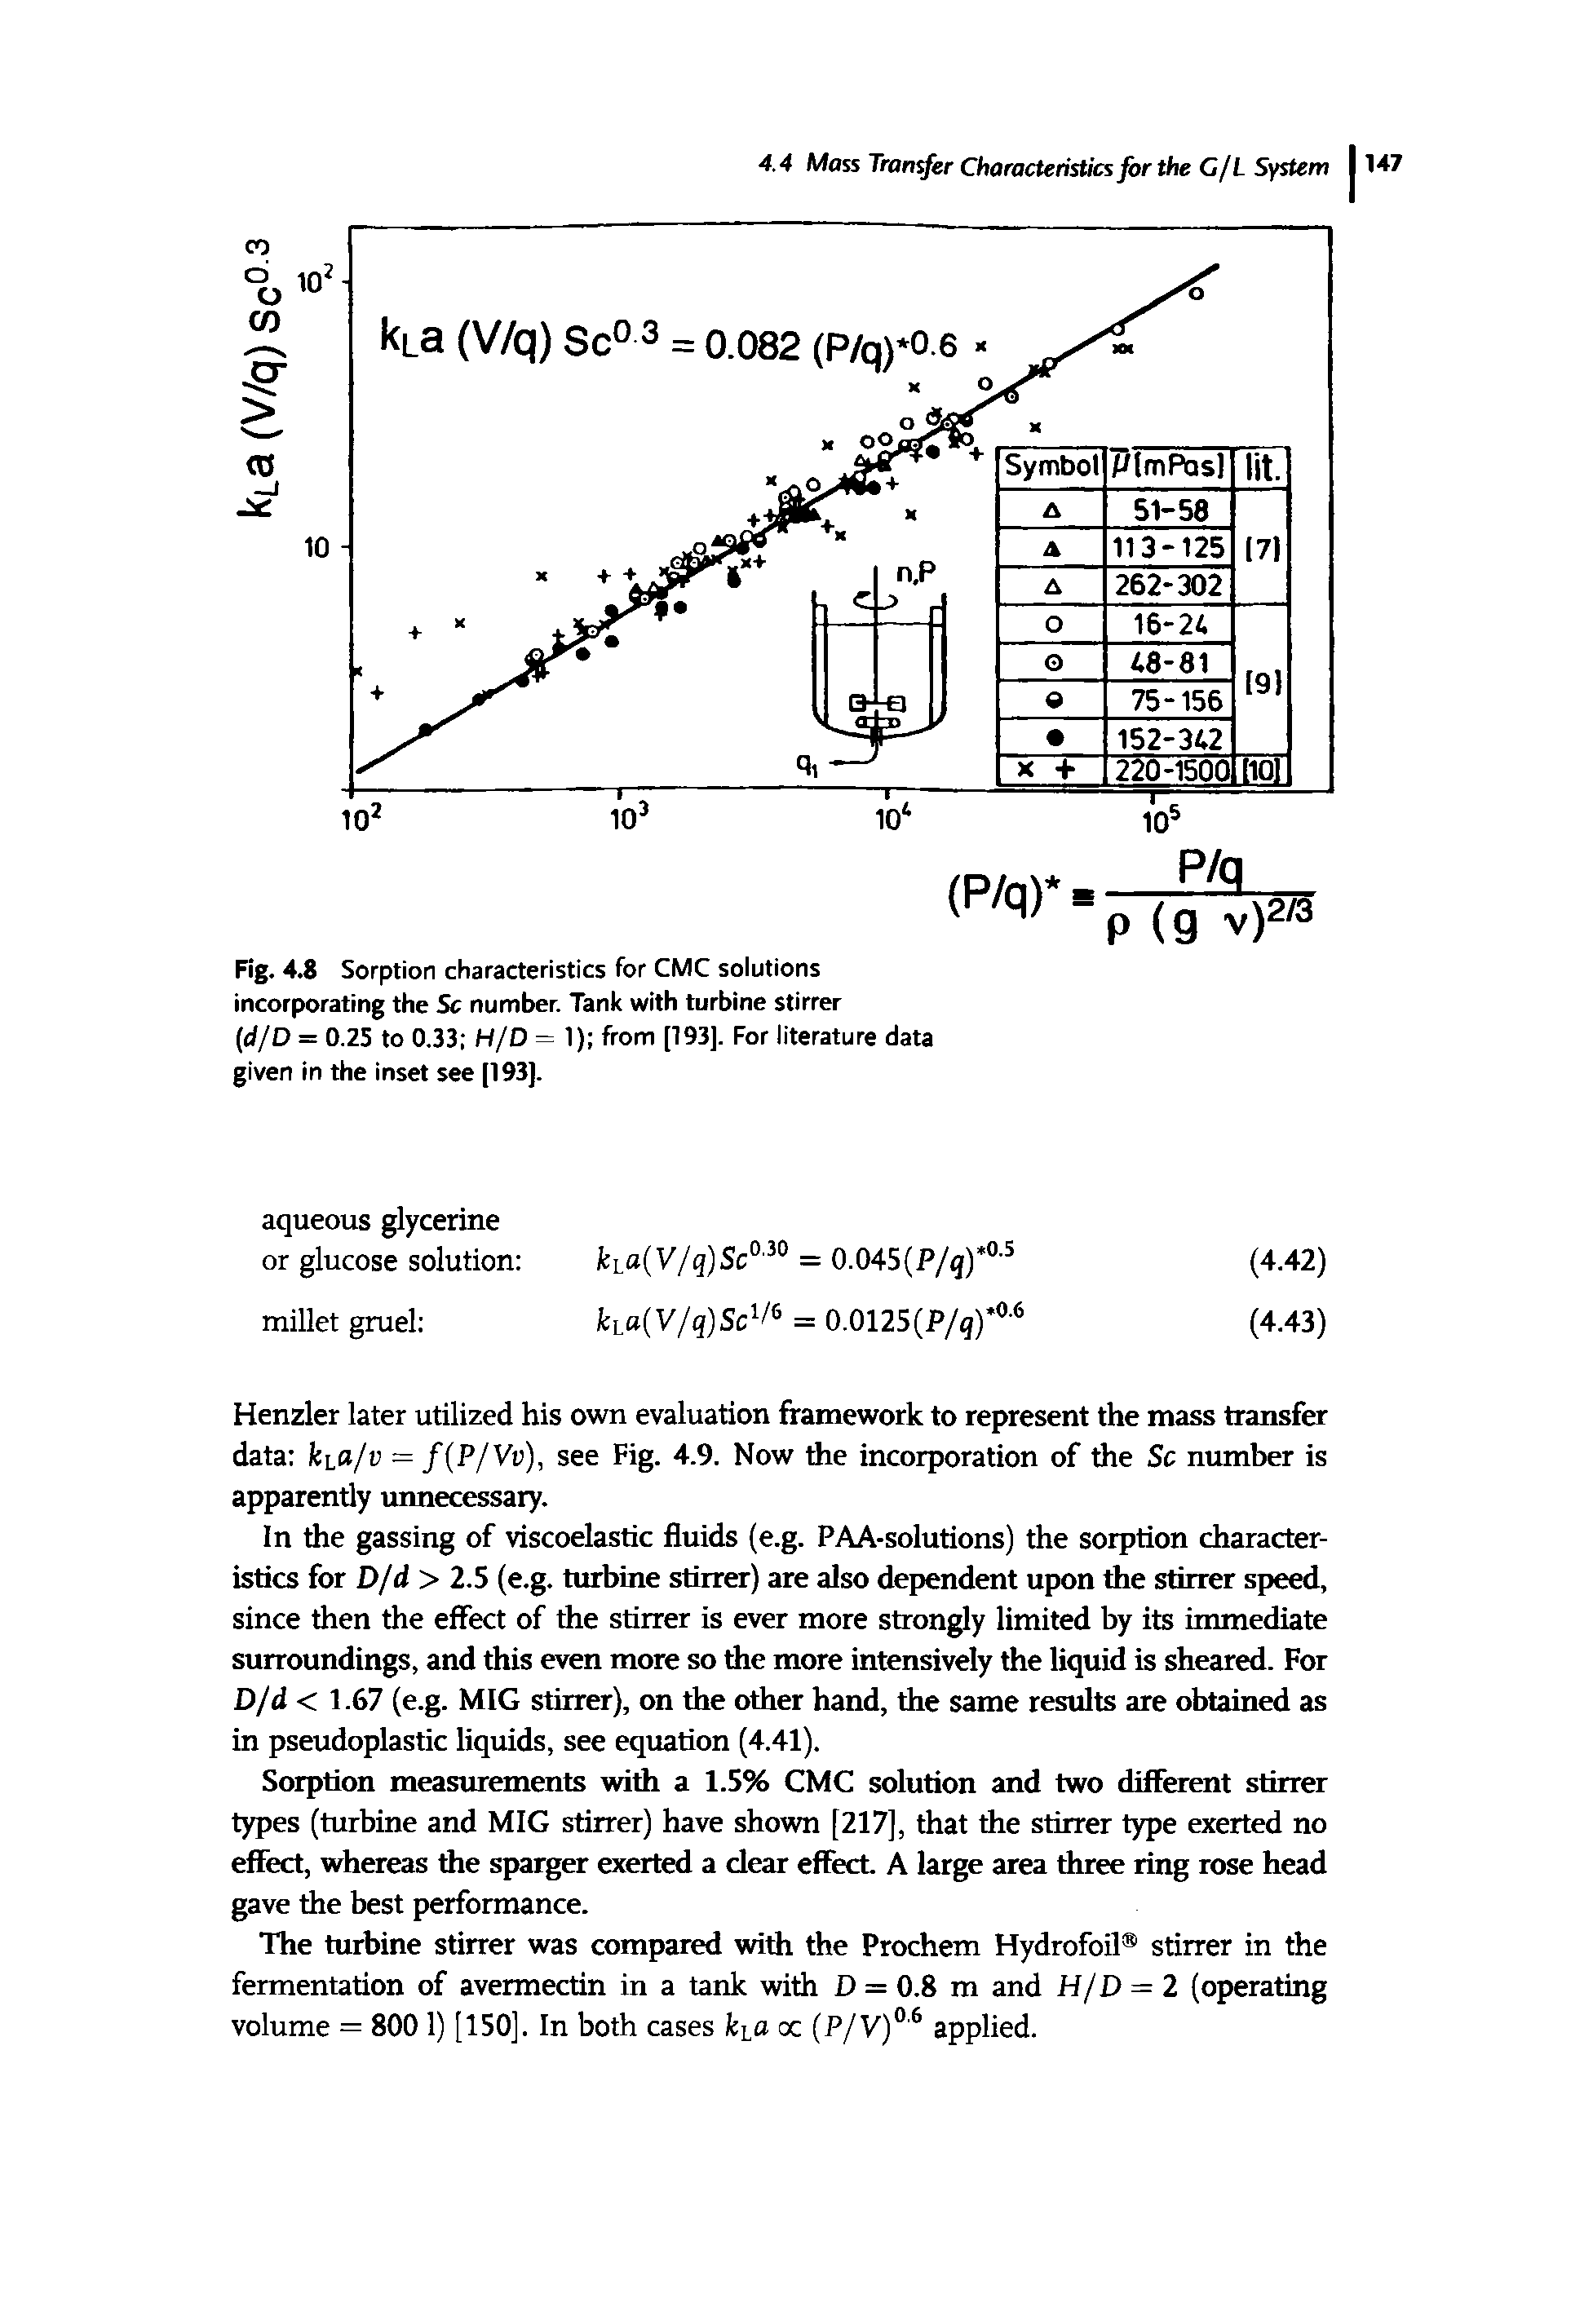 Fig. 4.8 Sorption characteristics for CMC solutions incorporating the Sc number. Tank with turbine stirrer (d/D = 0.25 to 0.33 H/D = 1) from [193]. For literature data given in the inset see [193].